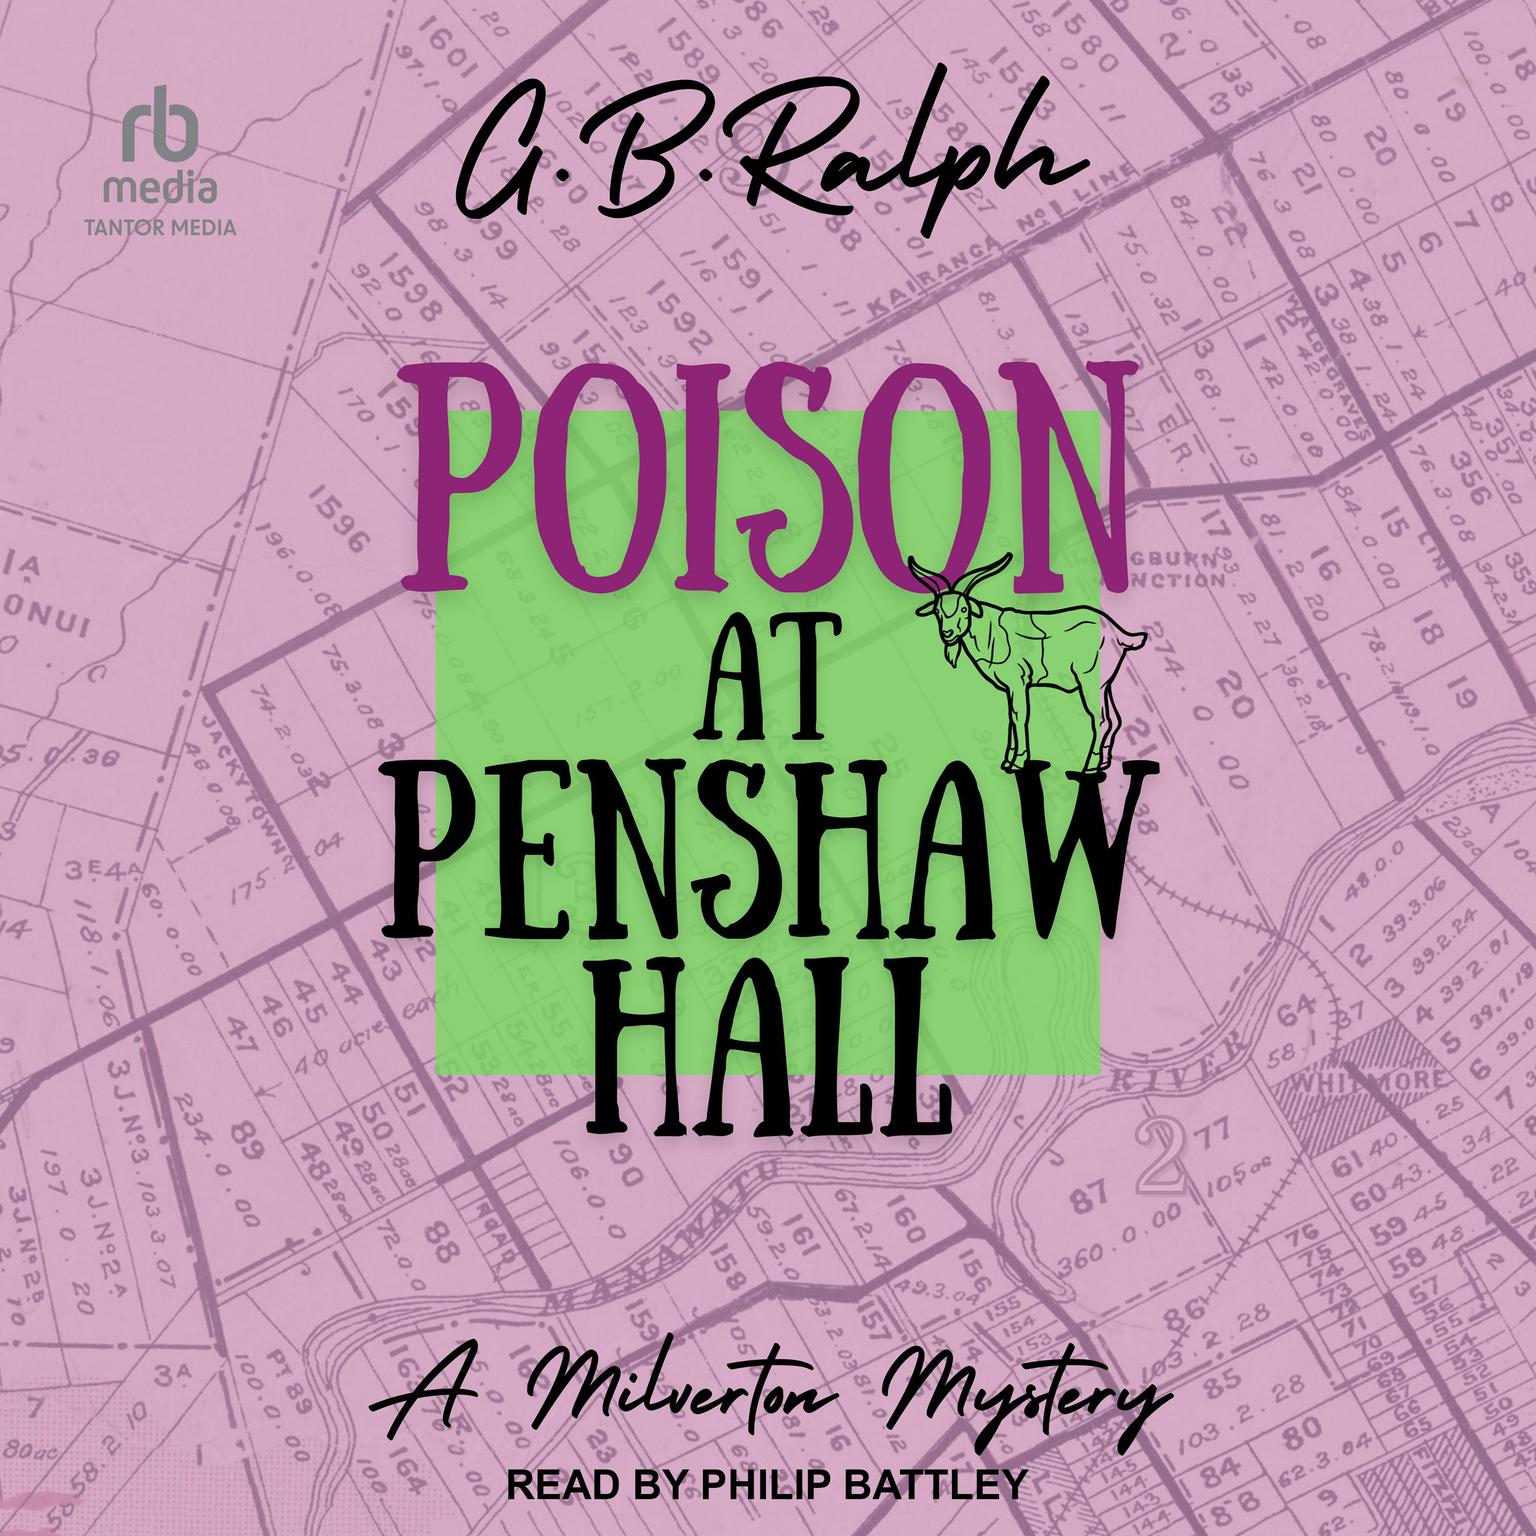 Poison at Penshaw Hall Audiobook, by G B Ralph